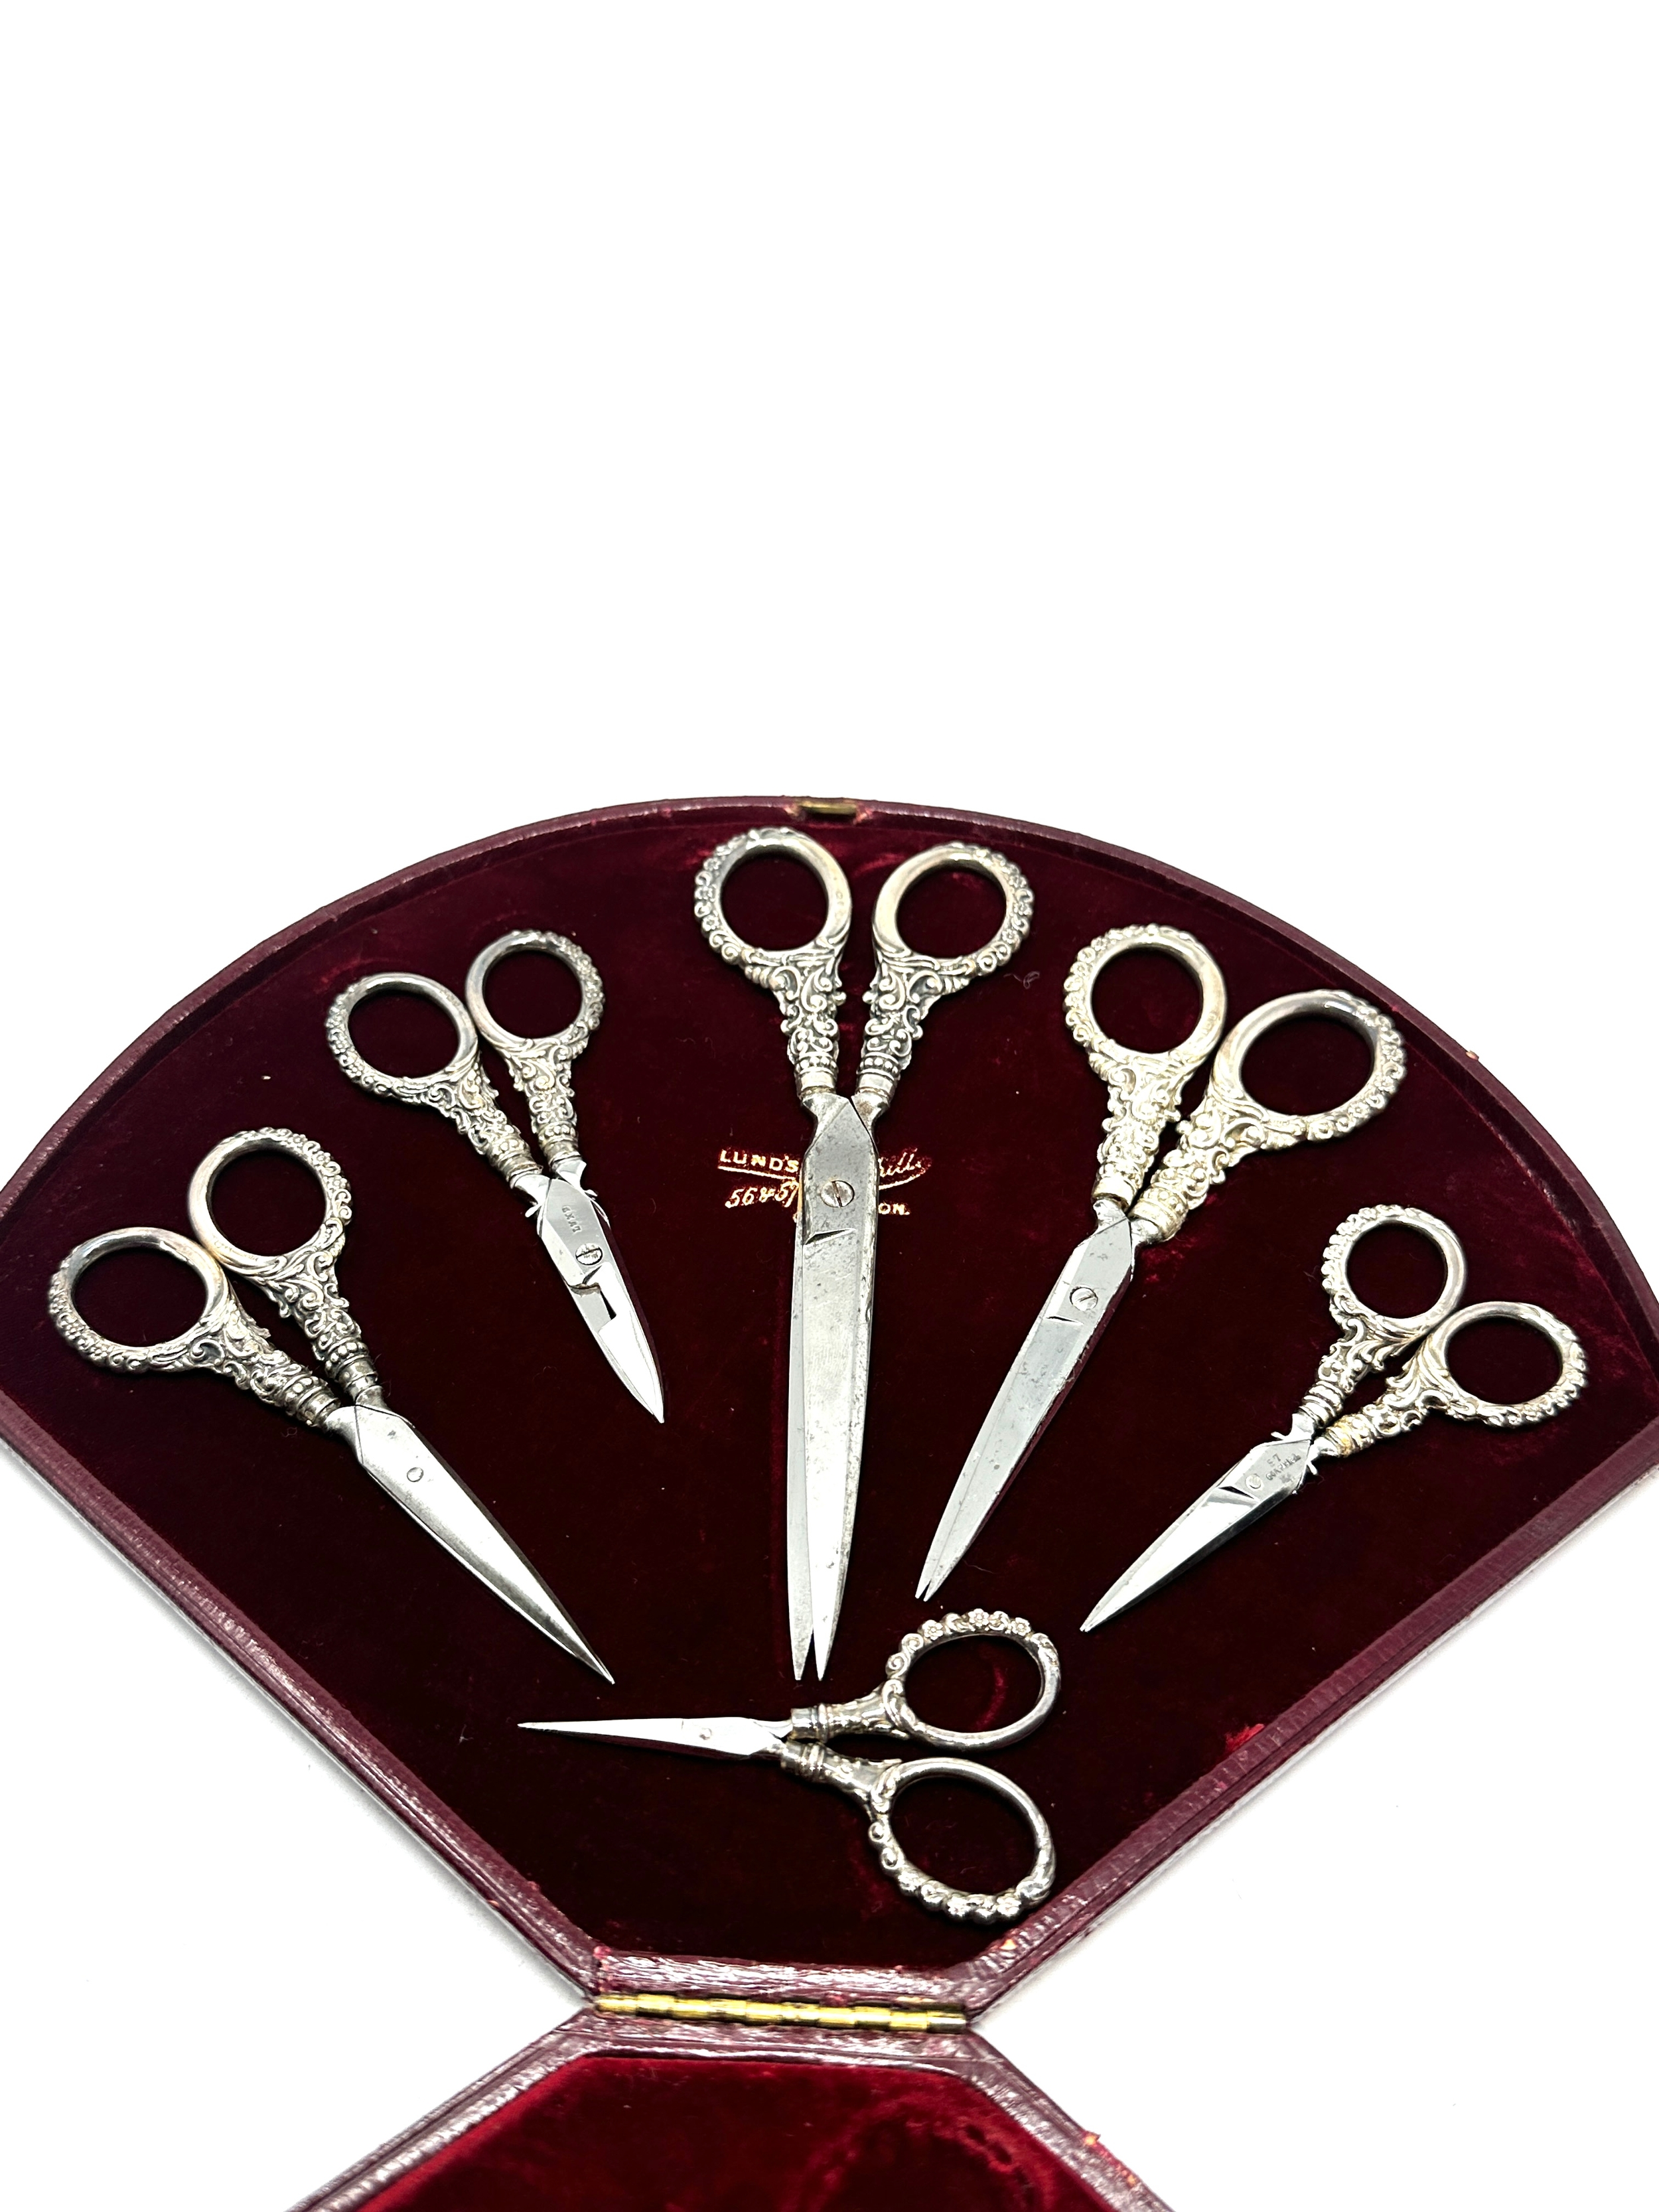 Fine large set of antique silver handle scissors original boxed by Lunds of London - Image 2 of 8